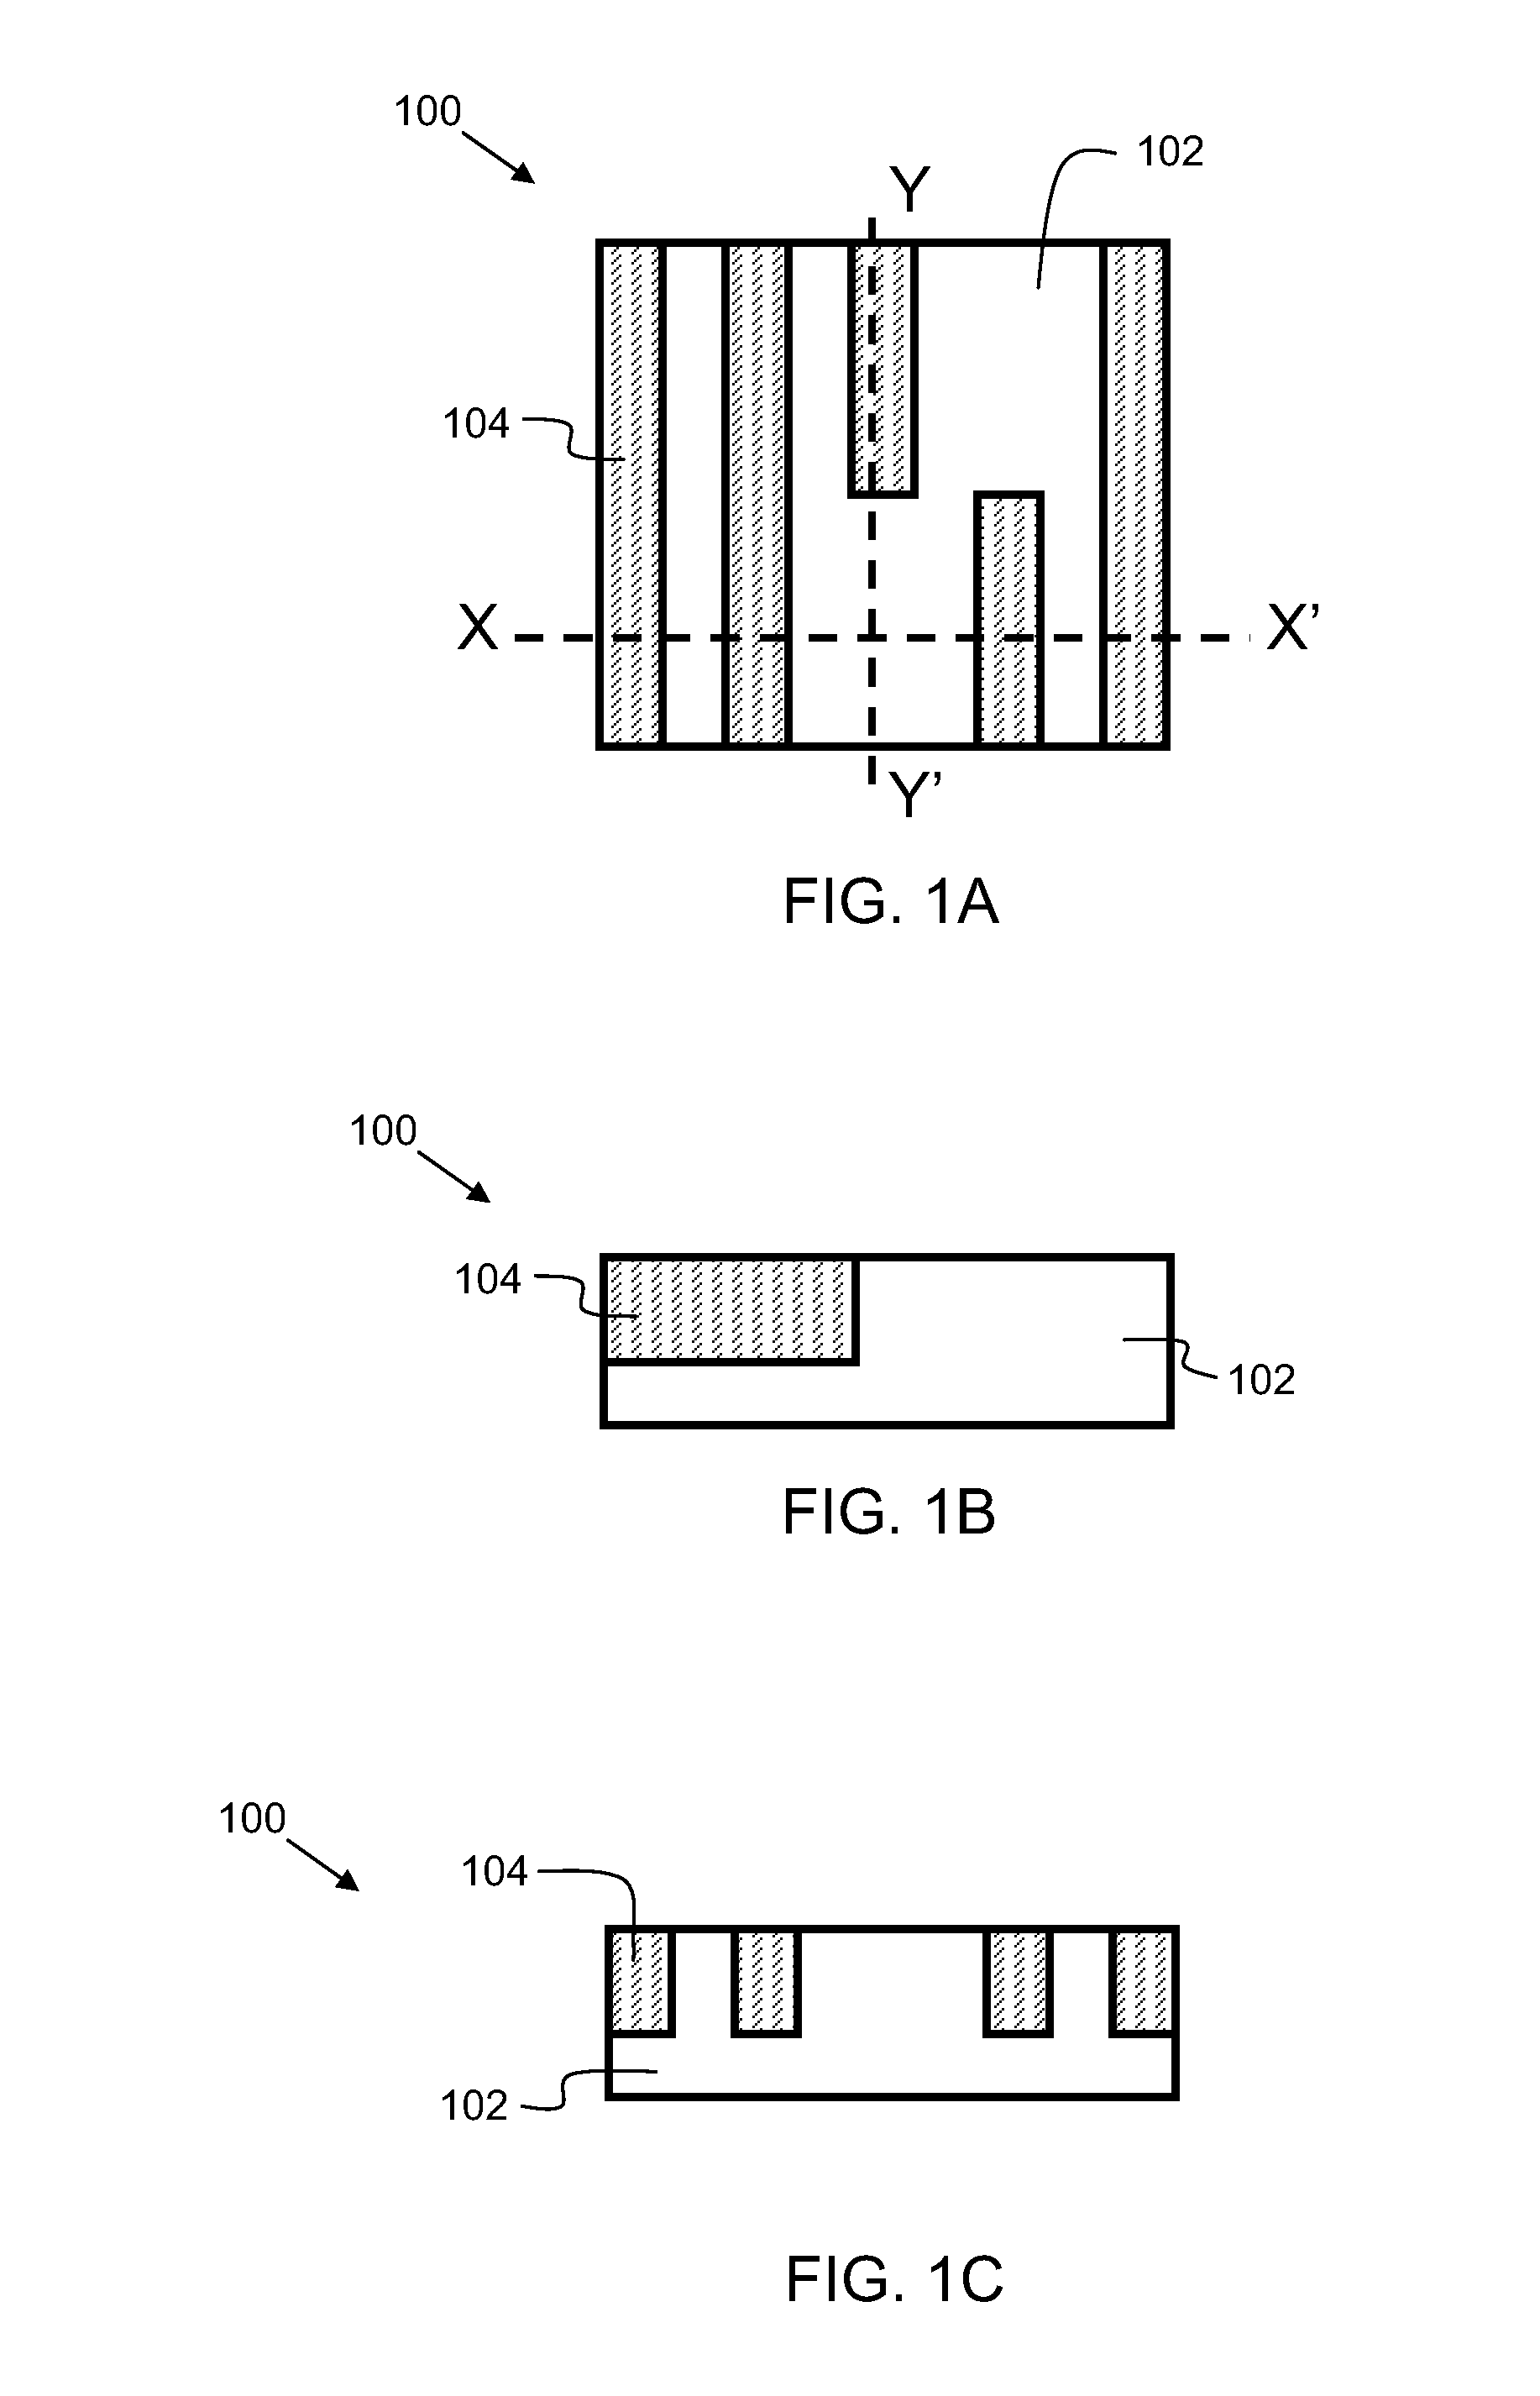 Random local metal cap layer formation for improved integrated circuit reliability